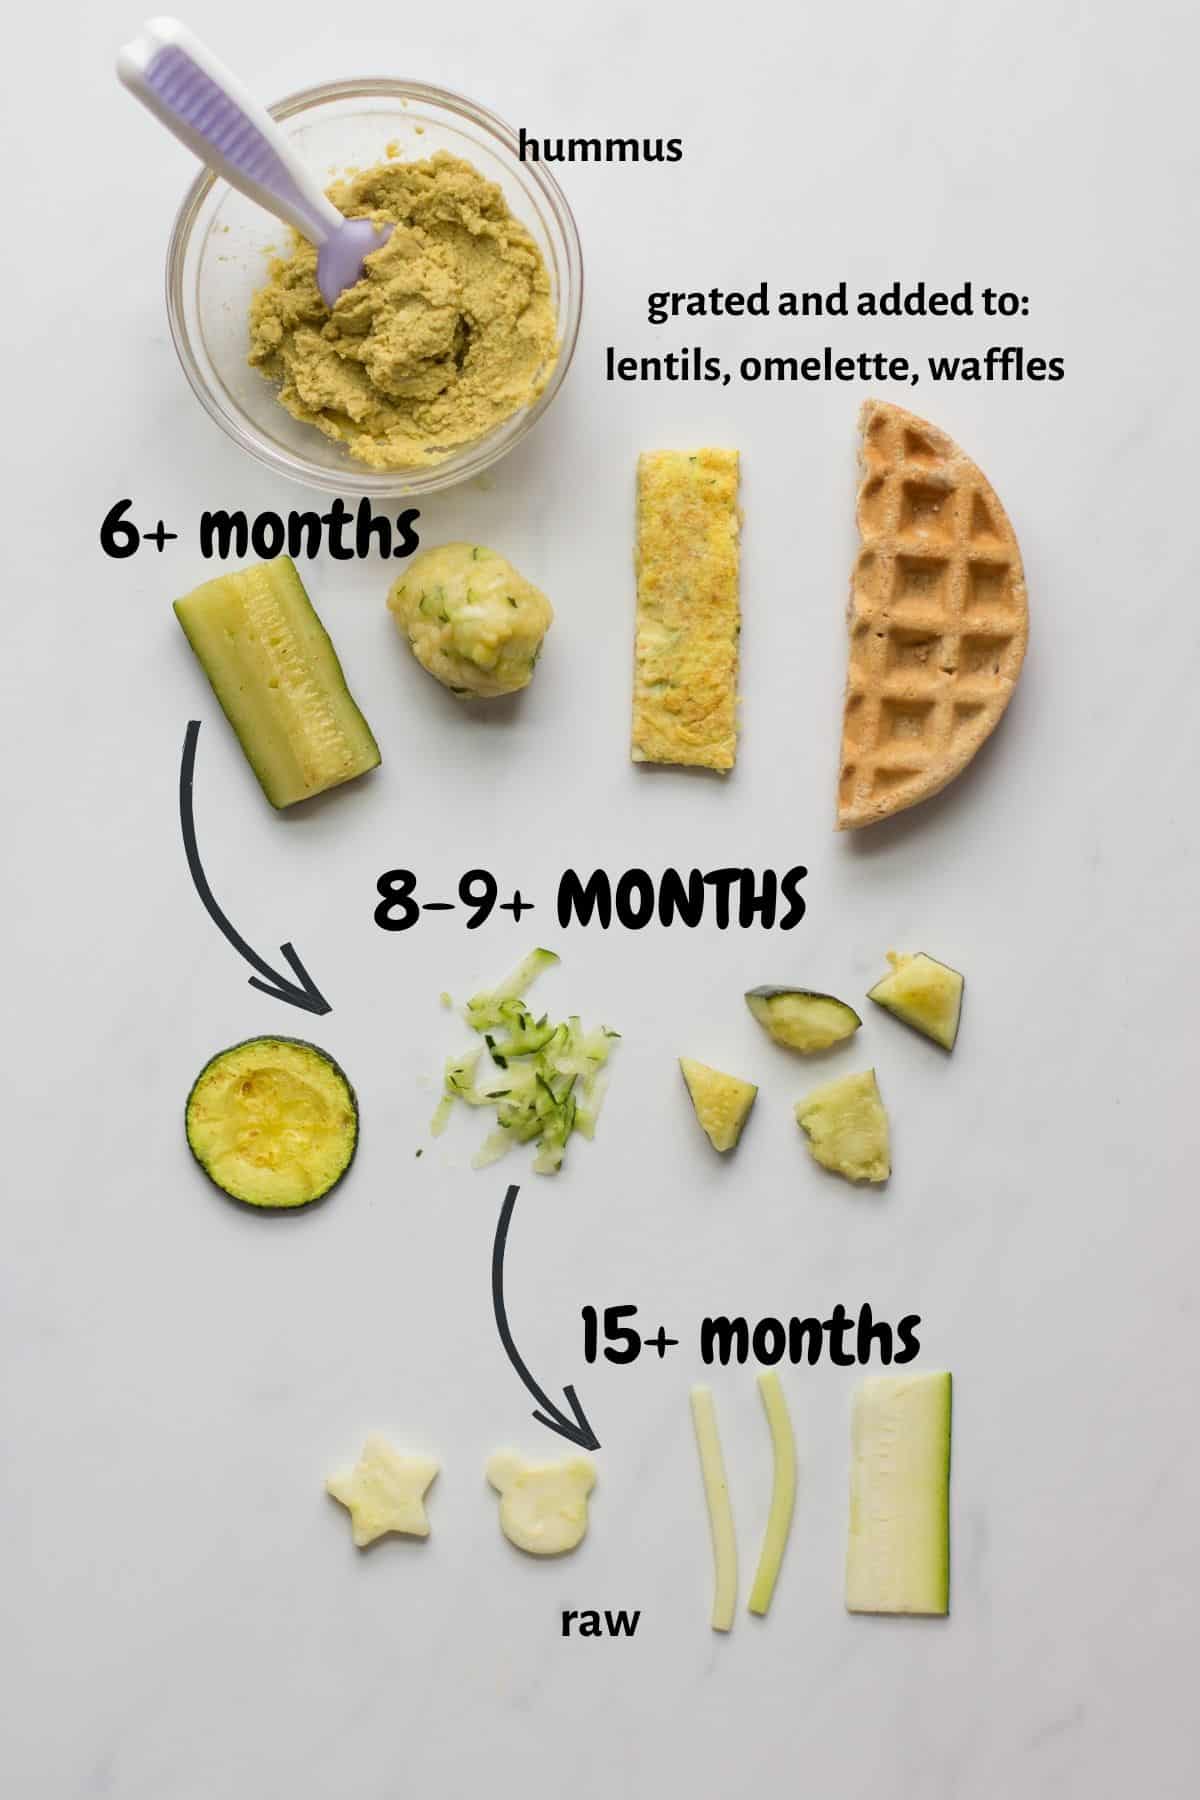 A graphic showing how to serve zucchini to babies from 6 to 15 plus months.